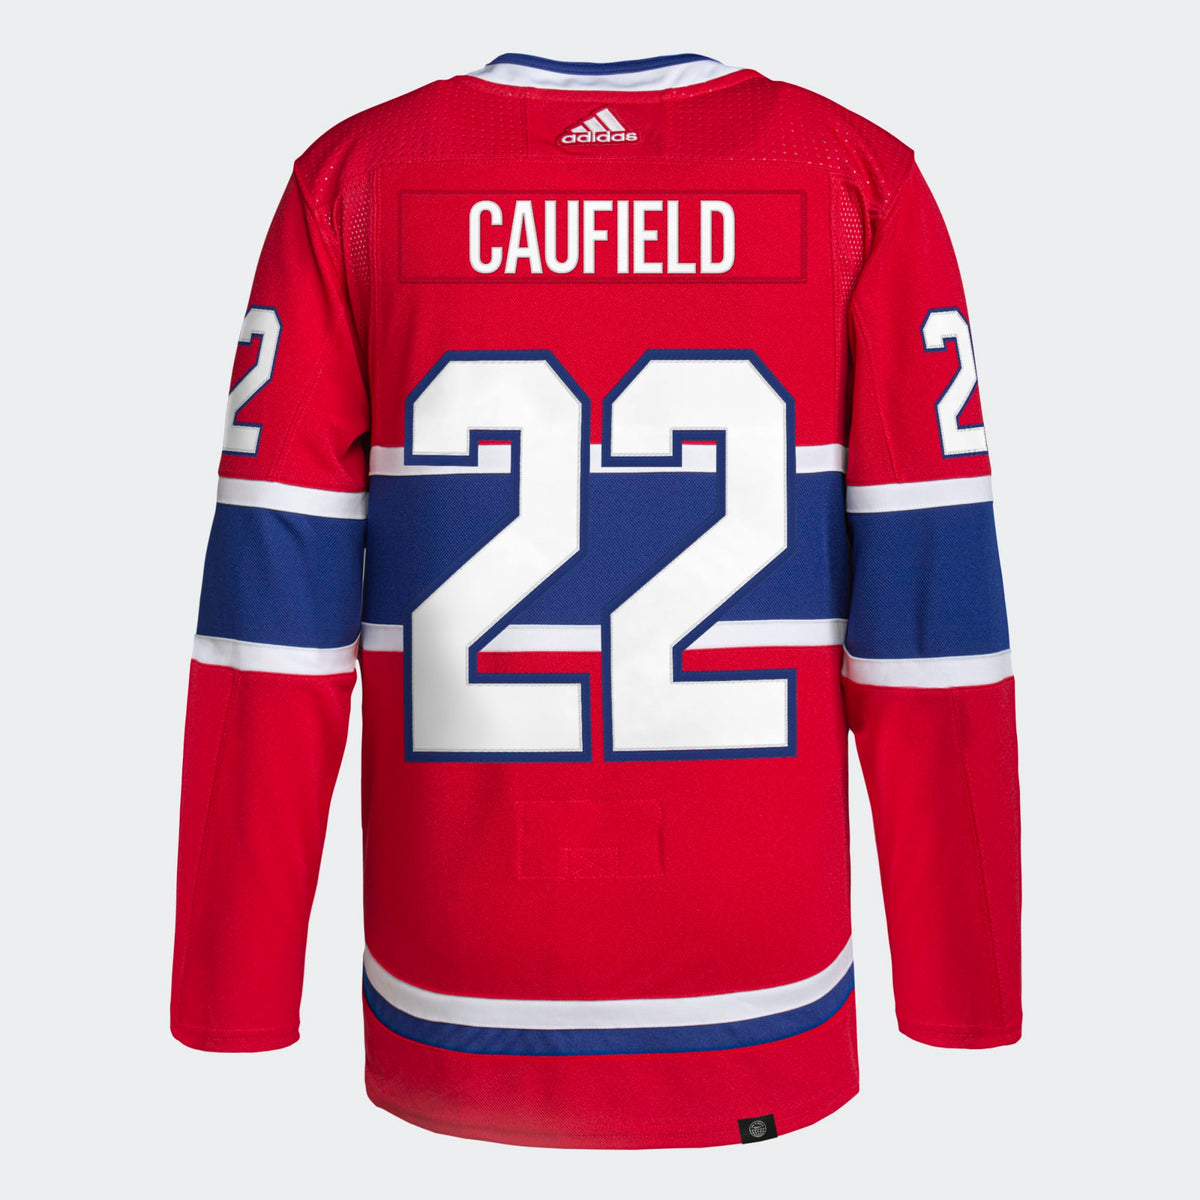 Cole Caufield Montreal Canadiens NHL Adidas Men's Red Primegreen